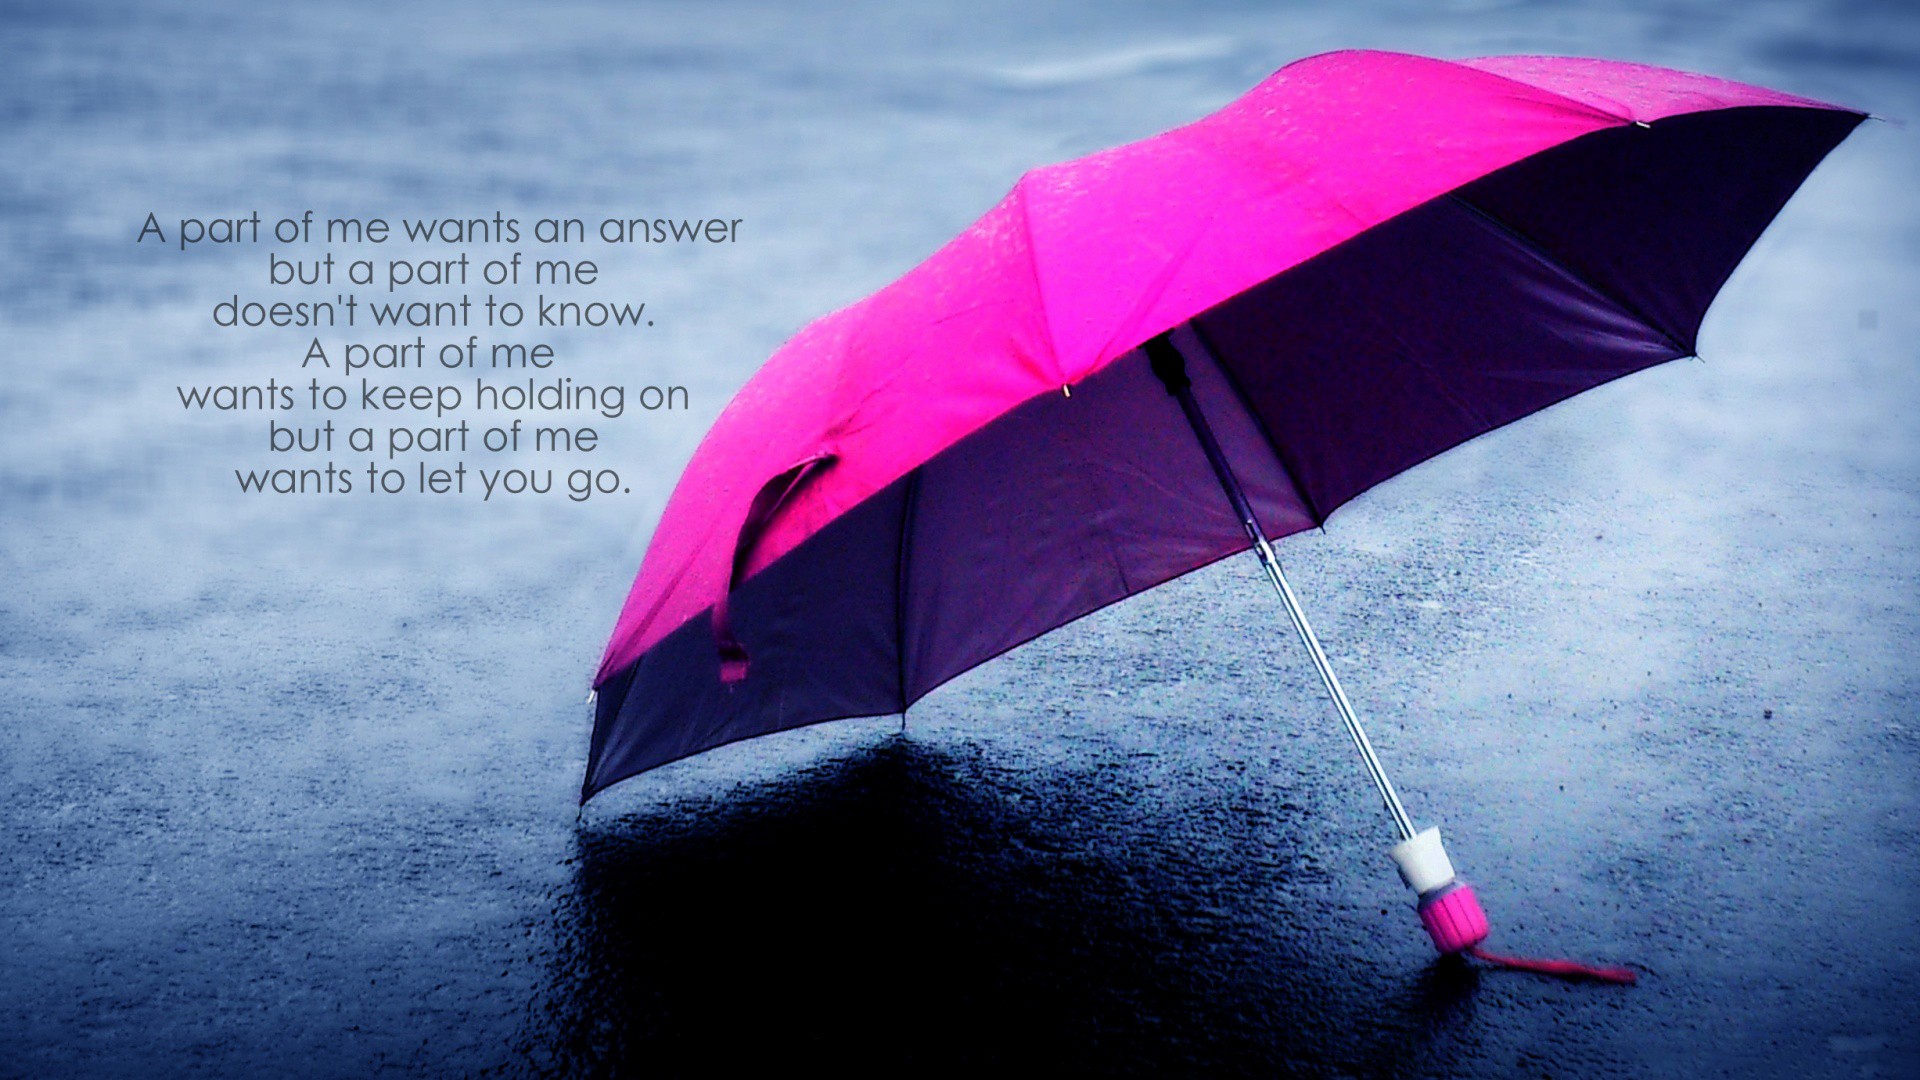 Let Go - Quotes About Umbrella And Love - HD Wallpaper 